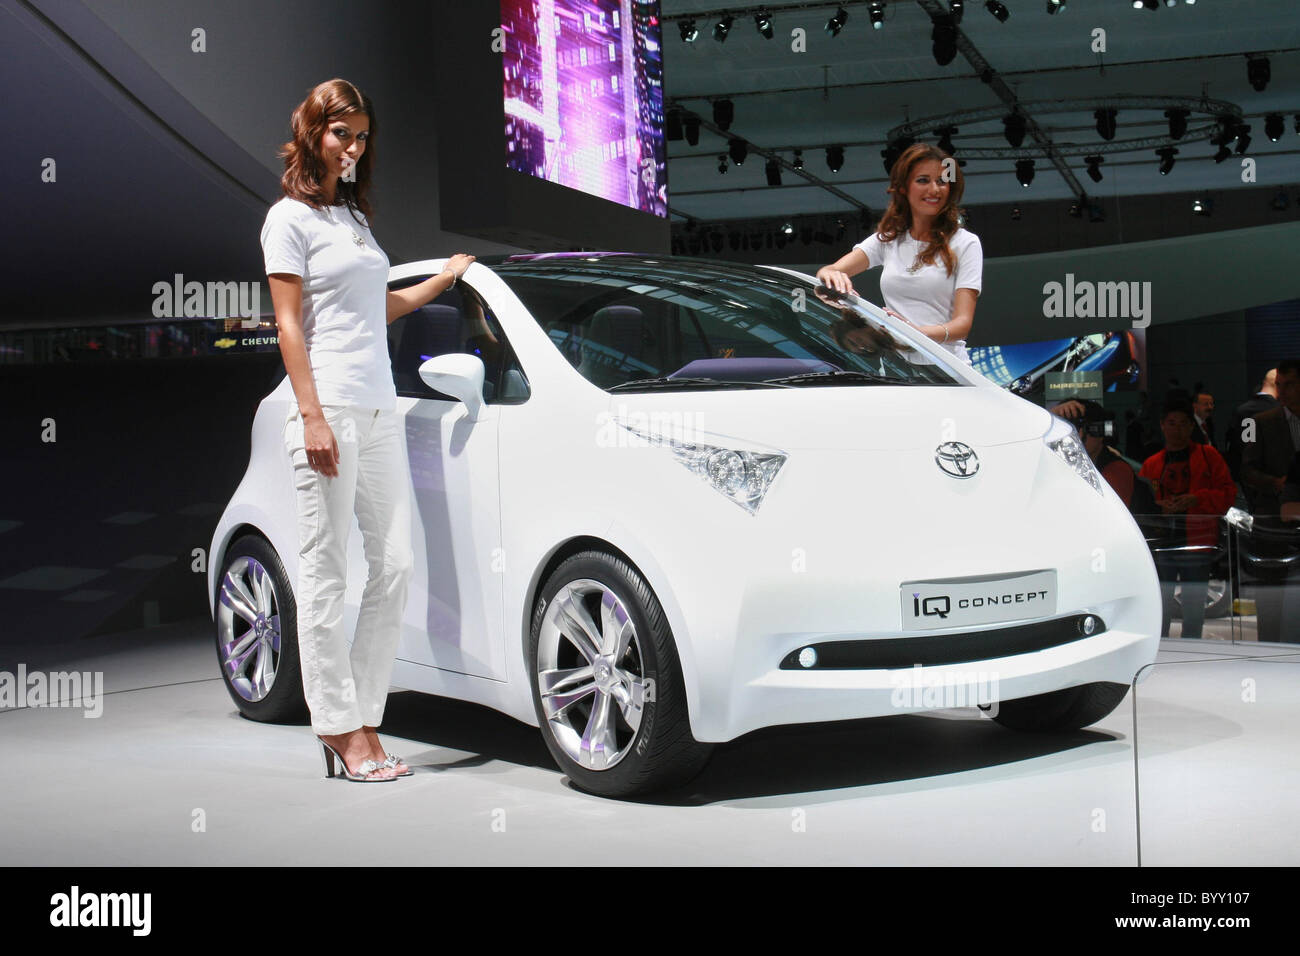 The Toyota iQ concept, unveiled at the Frankfurt Motor Show, marks a step change in small car design, challenging conventional Stock Photo